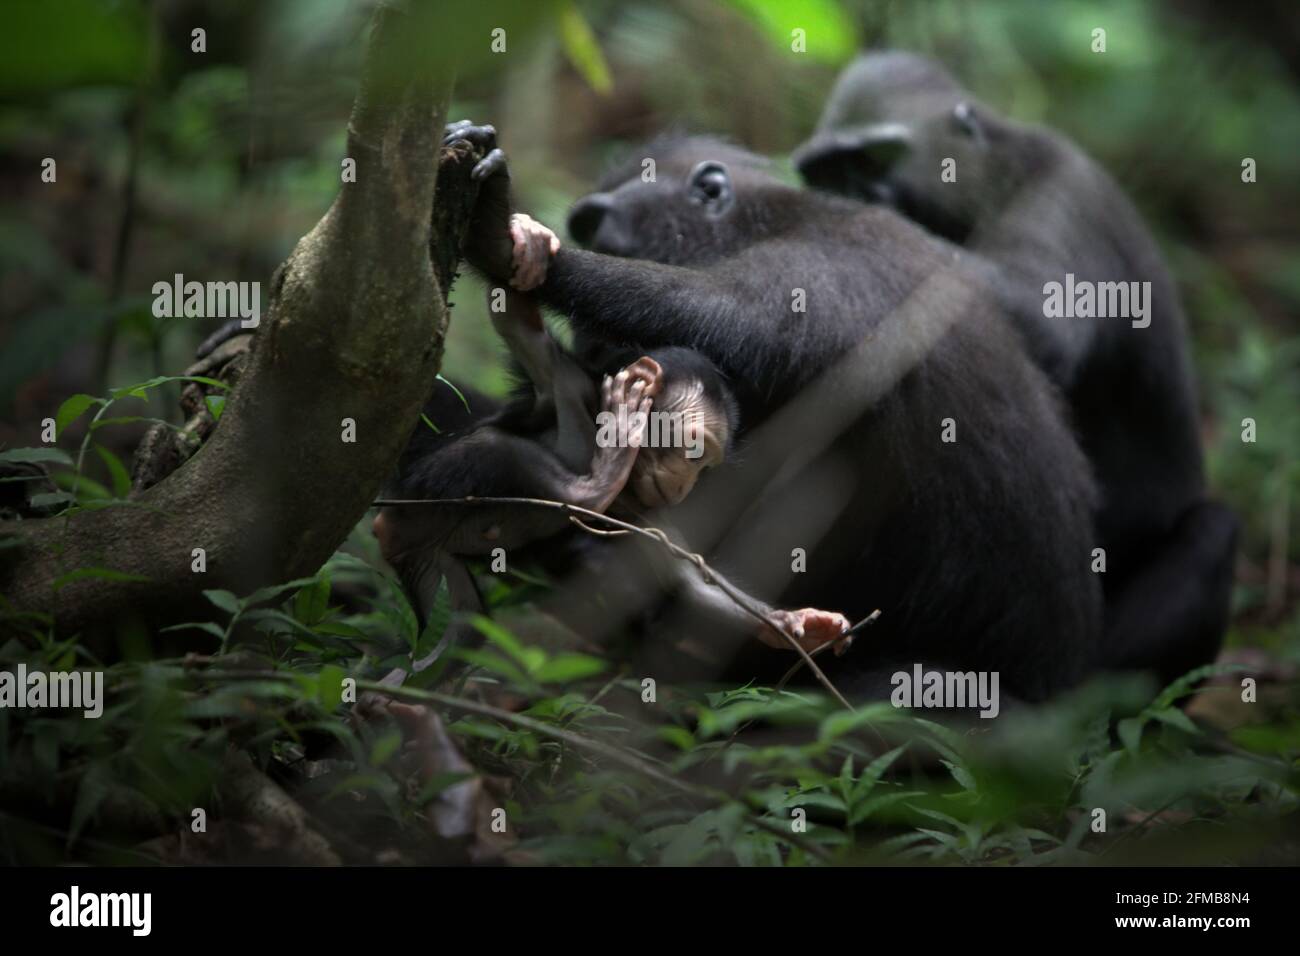 Crested macaques (Macaca nigra) with an offspring in Tangkoko Nature Reserve, North Sulawesi, Indonesia. Weaning period of a crested macaque infant--from 5 months of age until 1-year of age--is the earliest phase of life where infant mortality is the highest. Primate scientists from Macaca Nigra Project observed that '17 of the 78 infants (22%) disappeared in their first year of life. Eight of these 17 infants' dead bodies were found with large puncture wounds.' Stock Photo